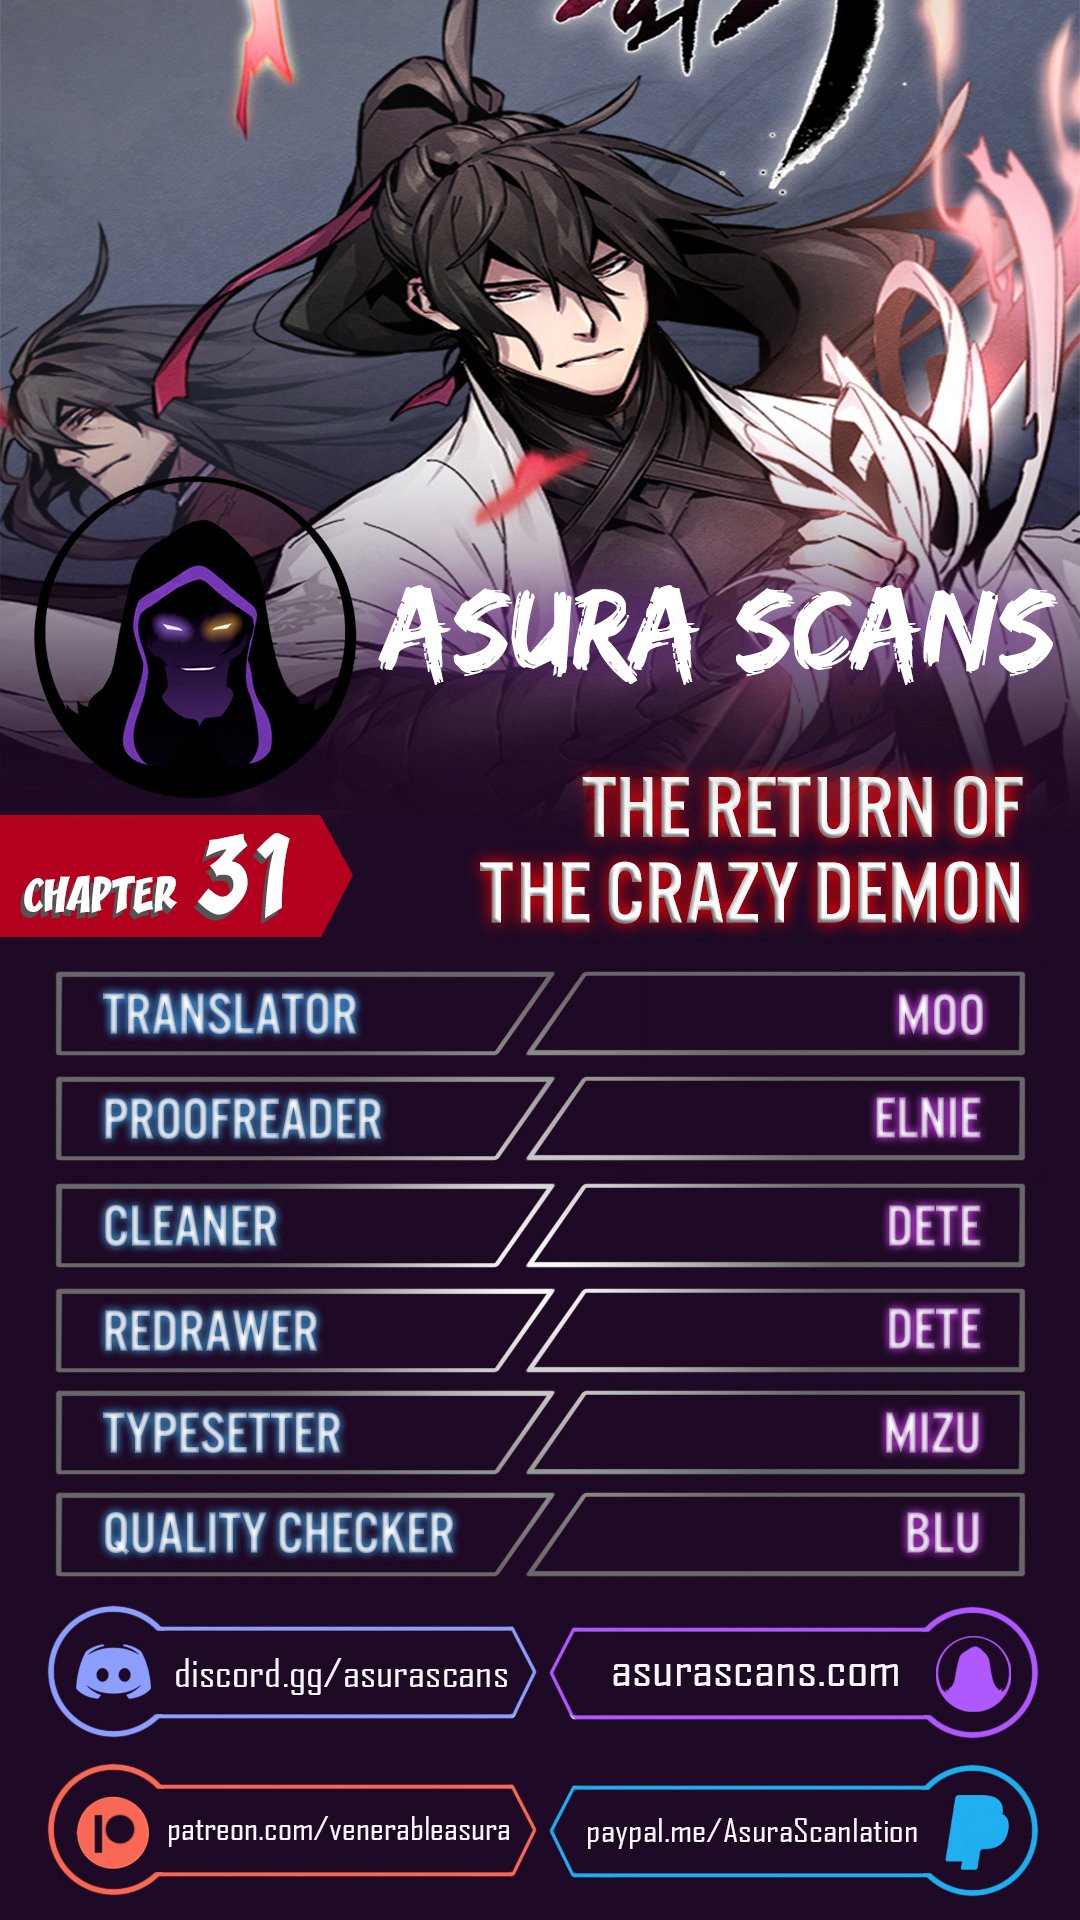 The Return of the Crazy Demon - Chapter 18572 - Image 1